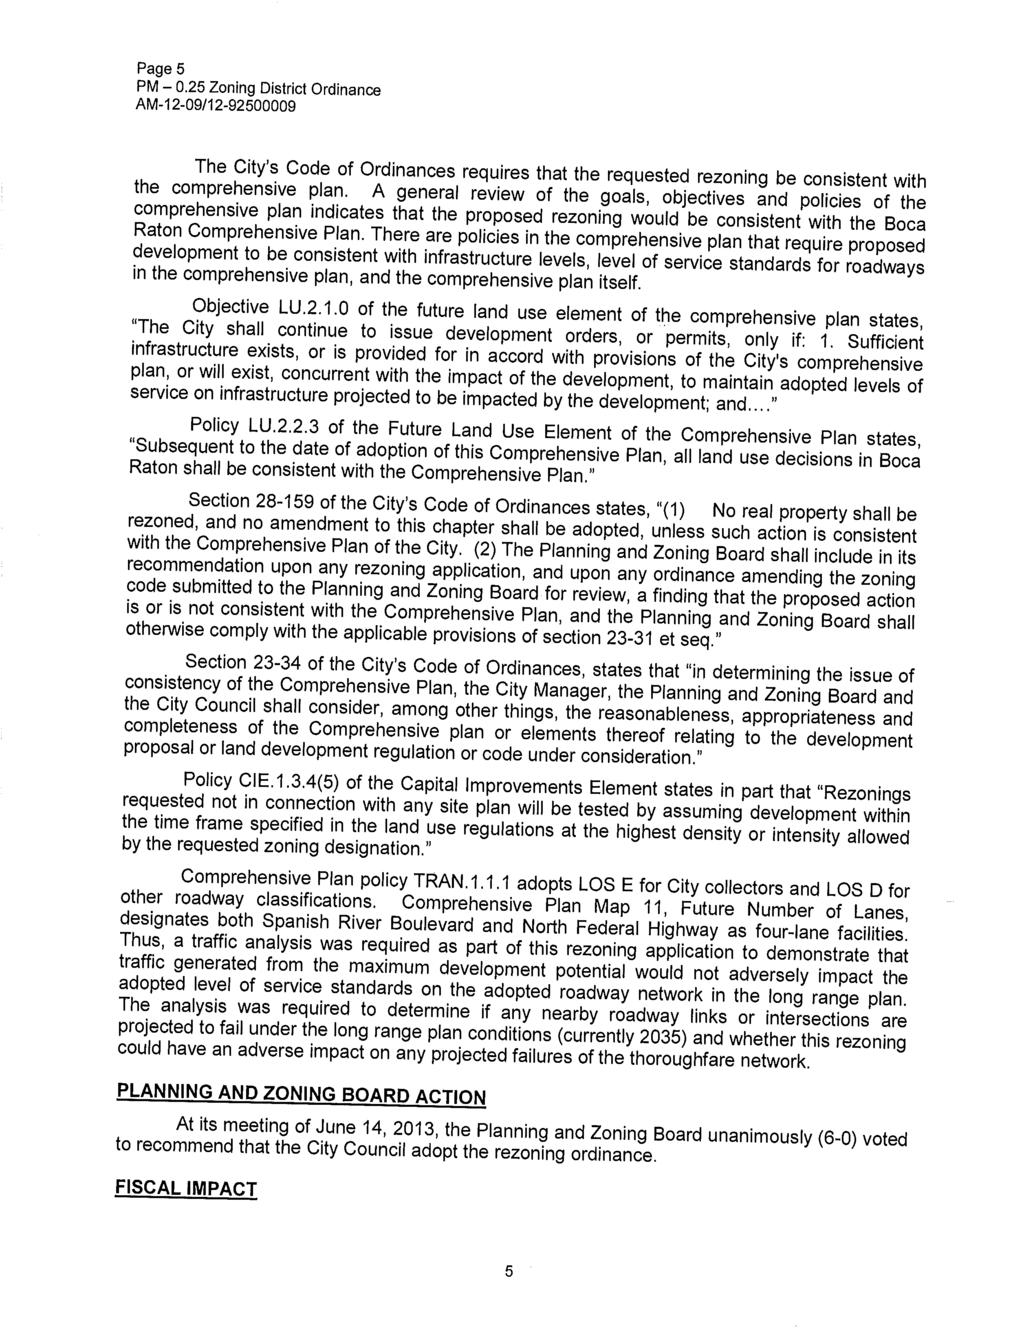 Page 5 PM - 0.25 Zoning District Ordinance AM-12-09/12-92500009 The City's Code of Ordinances requires that the requested rezoning be consistent with the comprehensive plan.